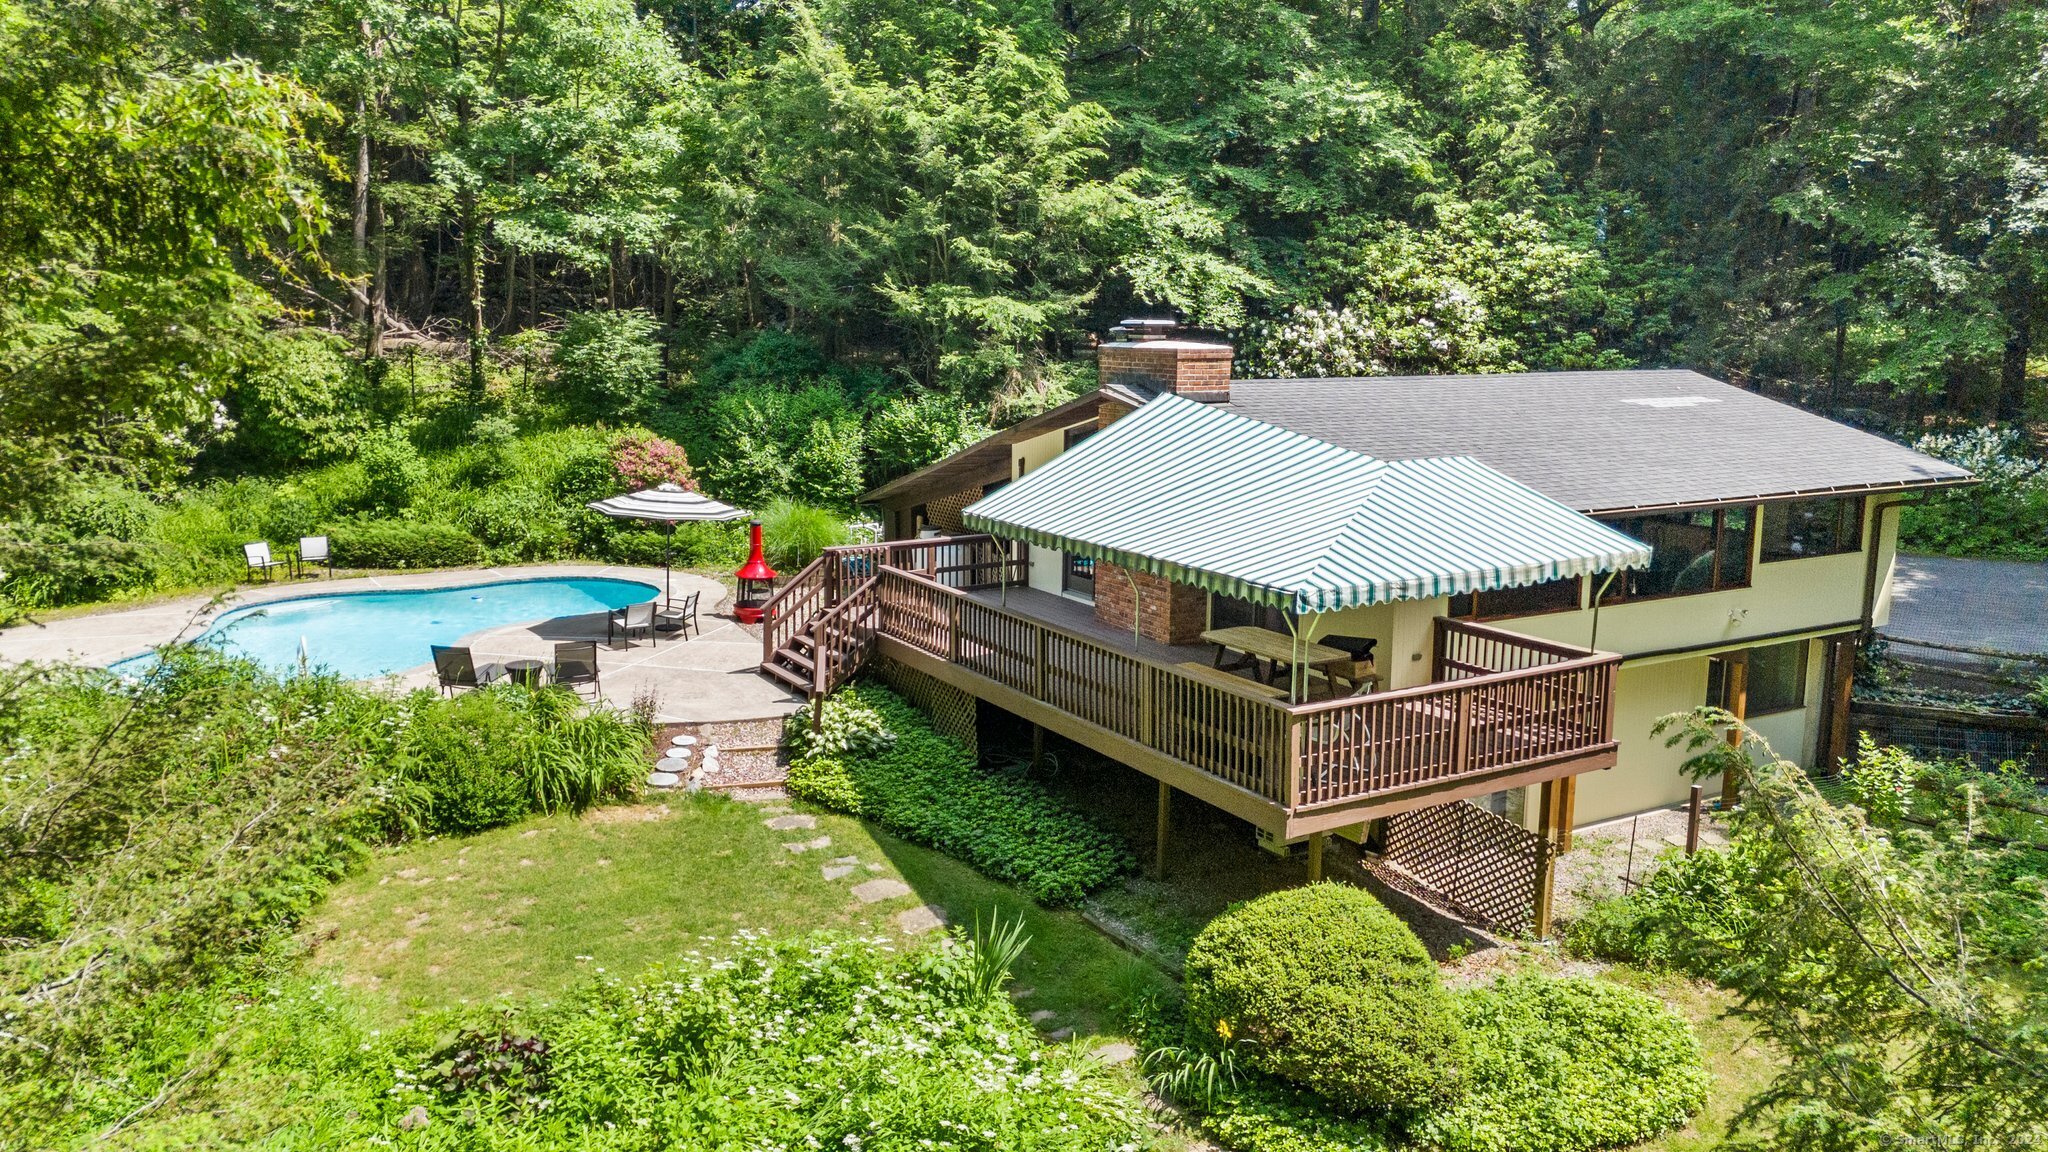 Move-in ready - just in time for summer! This home offers tranquility and privacy with 1, 616SF on 2.68 acres and a pool. Recently renovated in 2022, close to the Ridgefield line in West Redding with easy access to Rt 7 & 84 yet tucked into the woods. The main level of this light-filled Deck House was fully renovated in 2022, ensuring views of the property with open concept; top-of-the-line finishes, including a Chef's kitchen featuring a Wolf induction range, undercounter oven, a 140 bottle capacity wine fridge, Bosch refrigerator, Electrolux dishwasher, custom granite countertops, counter seating, pendant lights and premium cabinets. New oak hardwood floors, mahogany trim, new custom mahogany windows and new Andersen sliding glass doors finish out the main level, which opens directly onto the deck. The open concept floor plan allows flexible space for dining and living room areas, with a wood-burning fireplace as a central feature. Spray-in foam insulation on the main level. The lower level carries three bright bedrooms and a bathroom, including laundry area. Ductless air conditioning was installed on both levels in 2023, can also be used for heat. Whole house generator. Enjoy the beauty of the perennial gardens and relaxing around and in the gunite pool! The interior perimeter of the yard is fenced, making it ideal for dog owners. Bird lovers will enjoy listening to nature at this peaceful oasis - perfect as a primary, secondary or retirement residence! Agent/owner